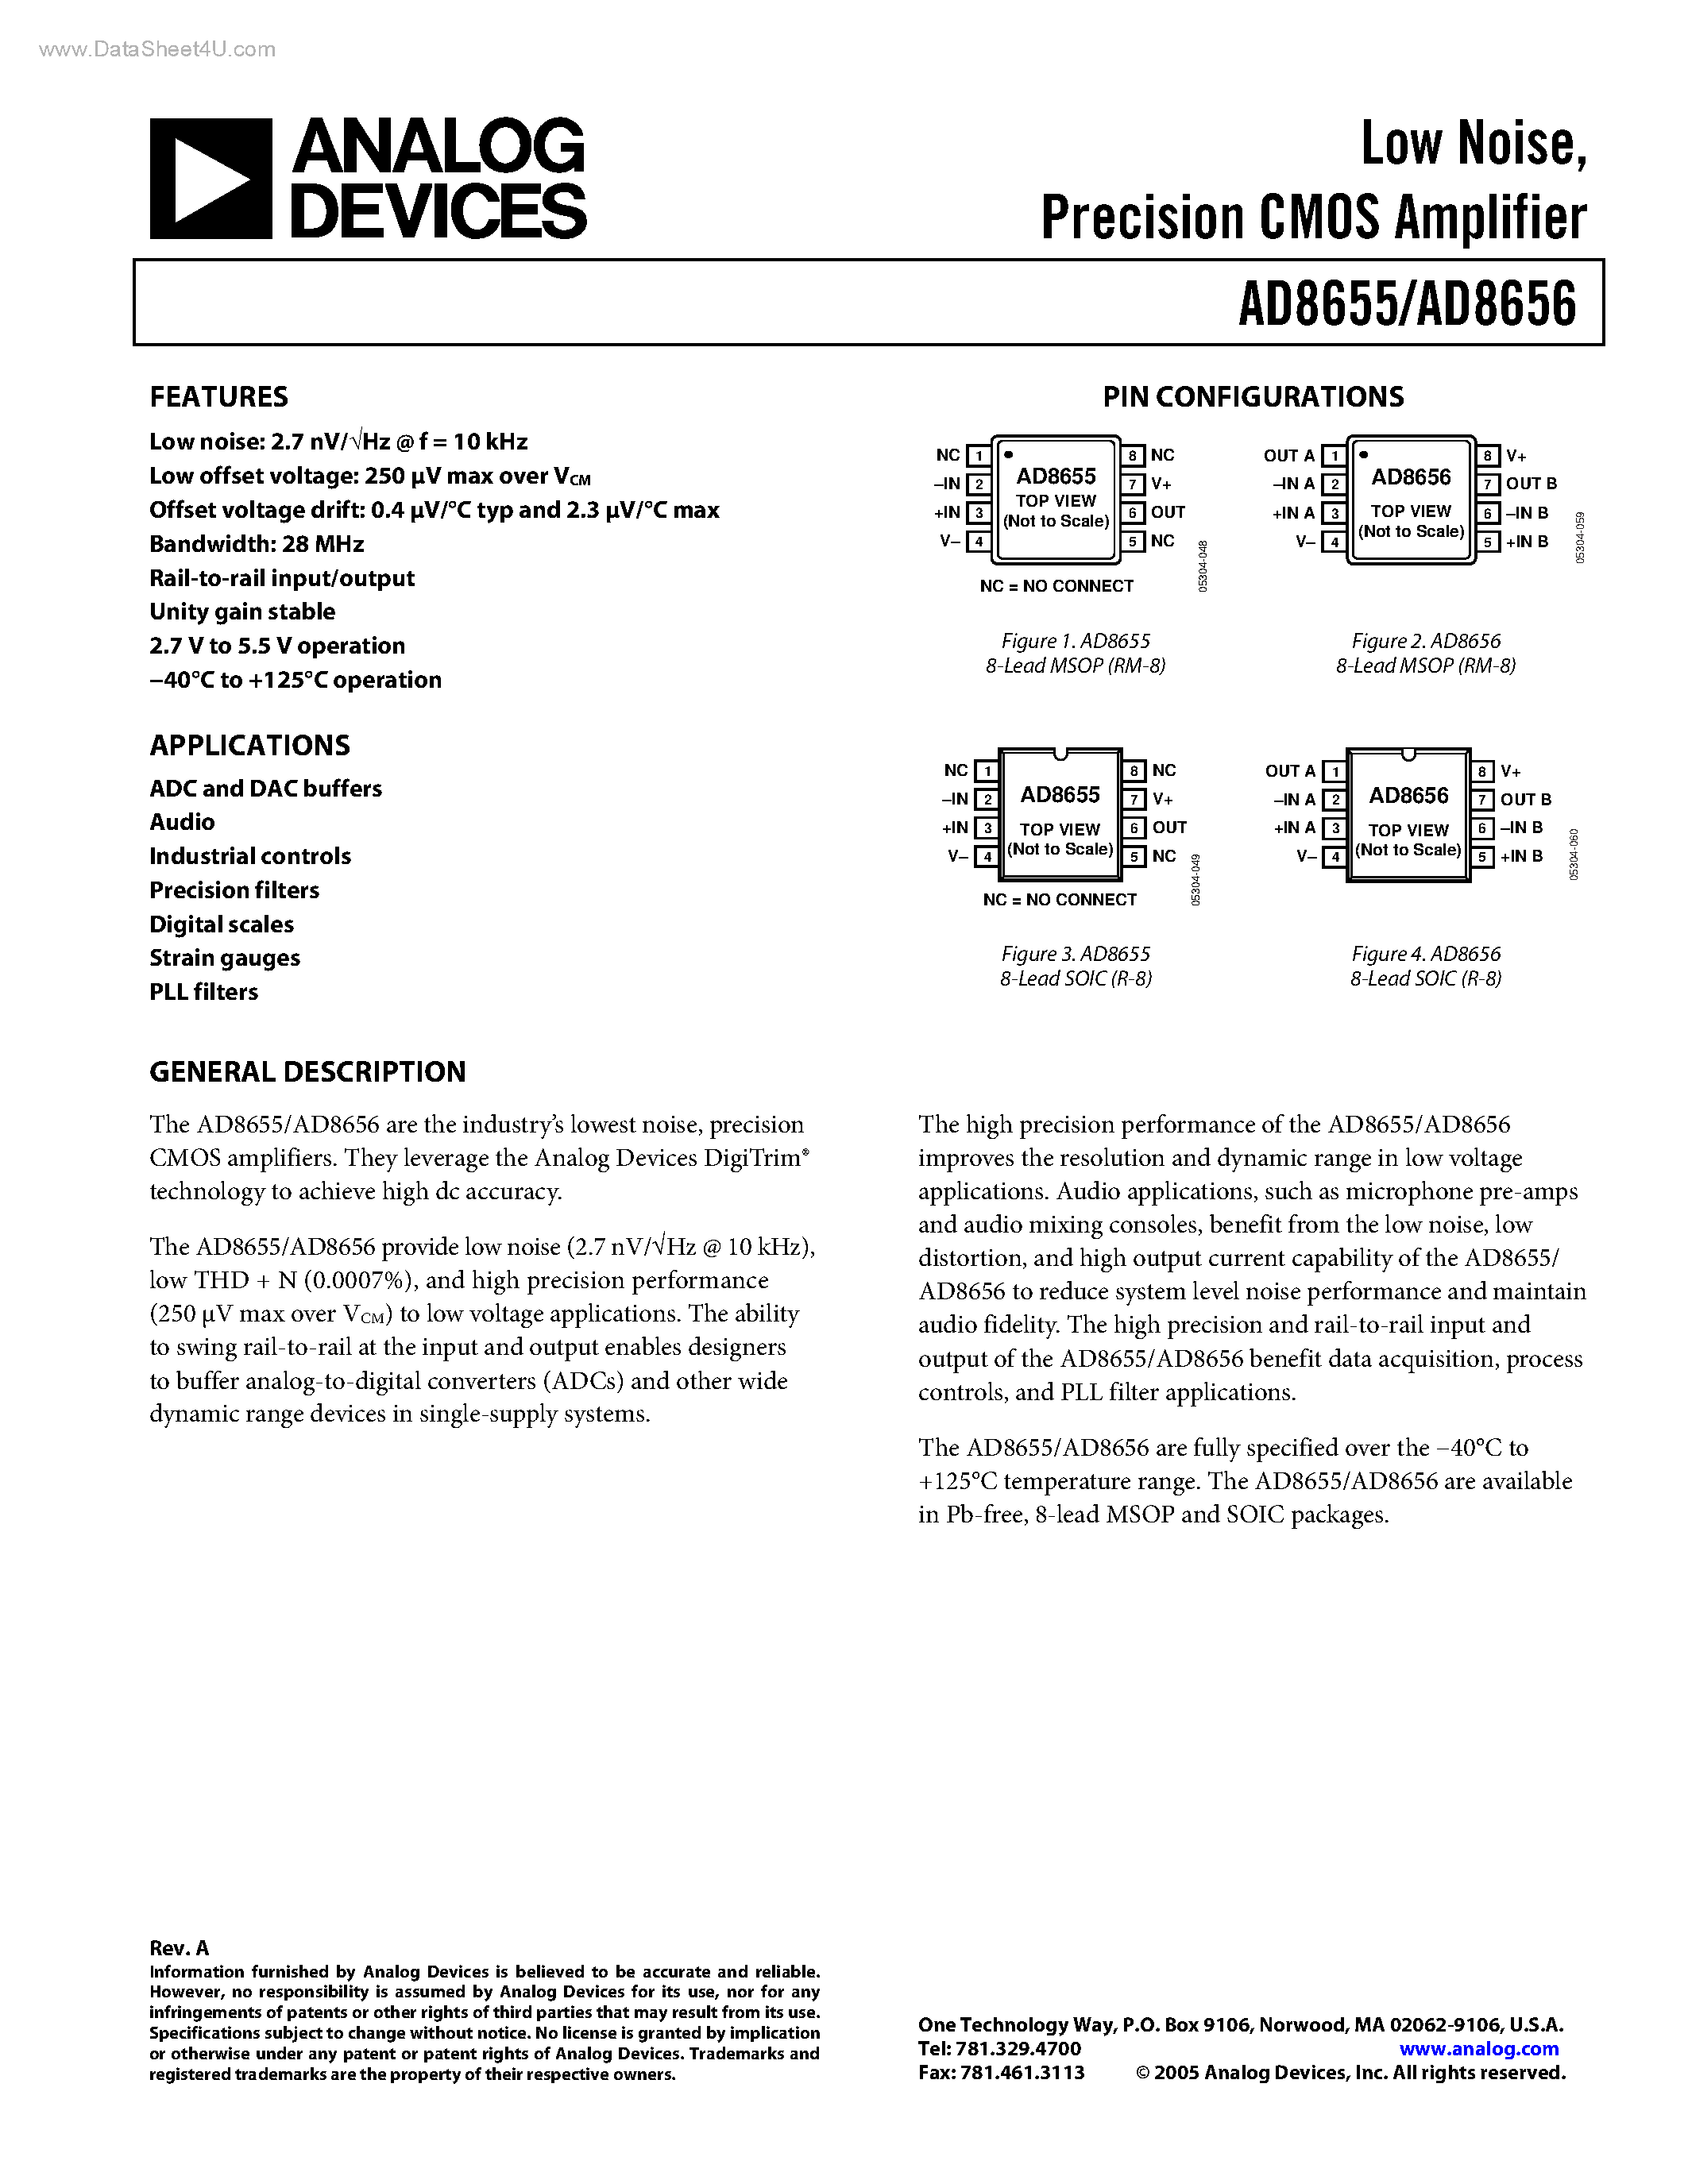 Datasheet AD8655 - (AD8655 / AD8656) Precision CMOS Amplifier page 1